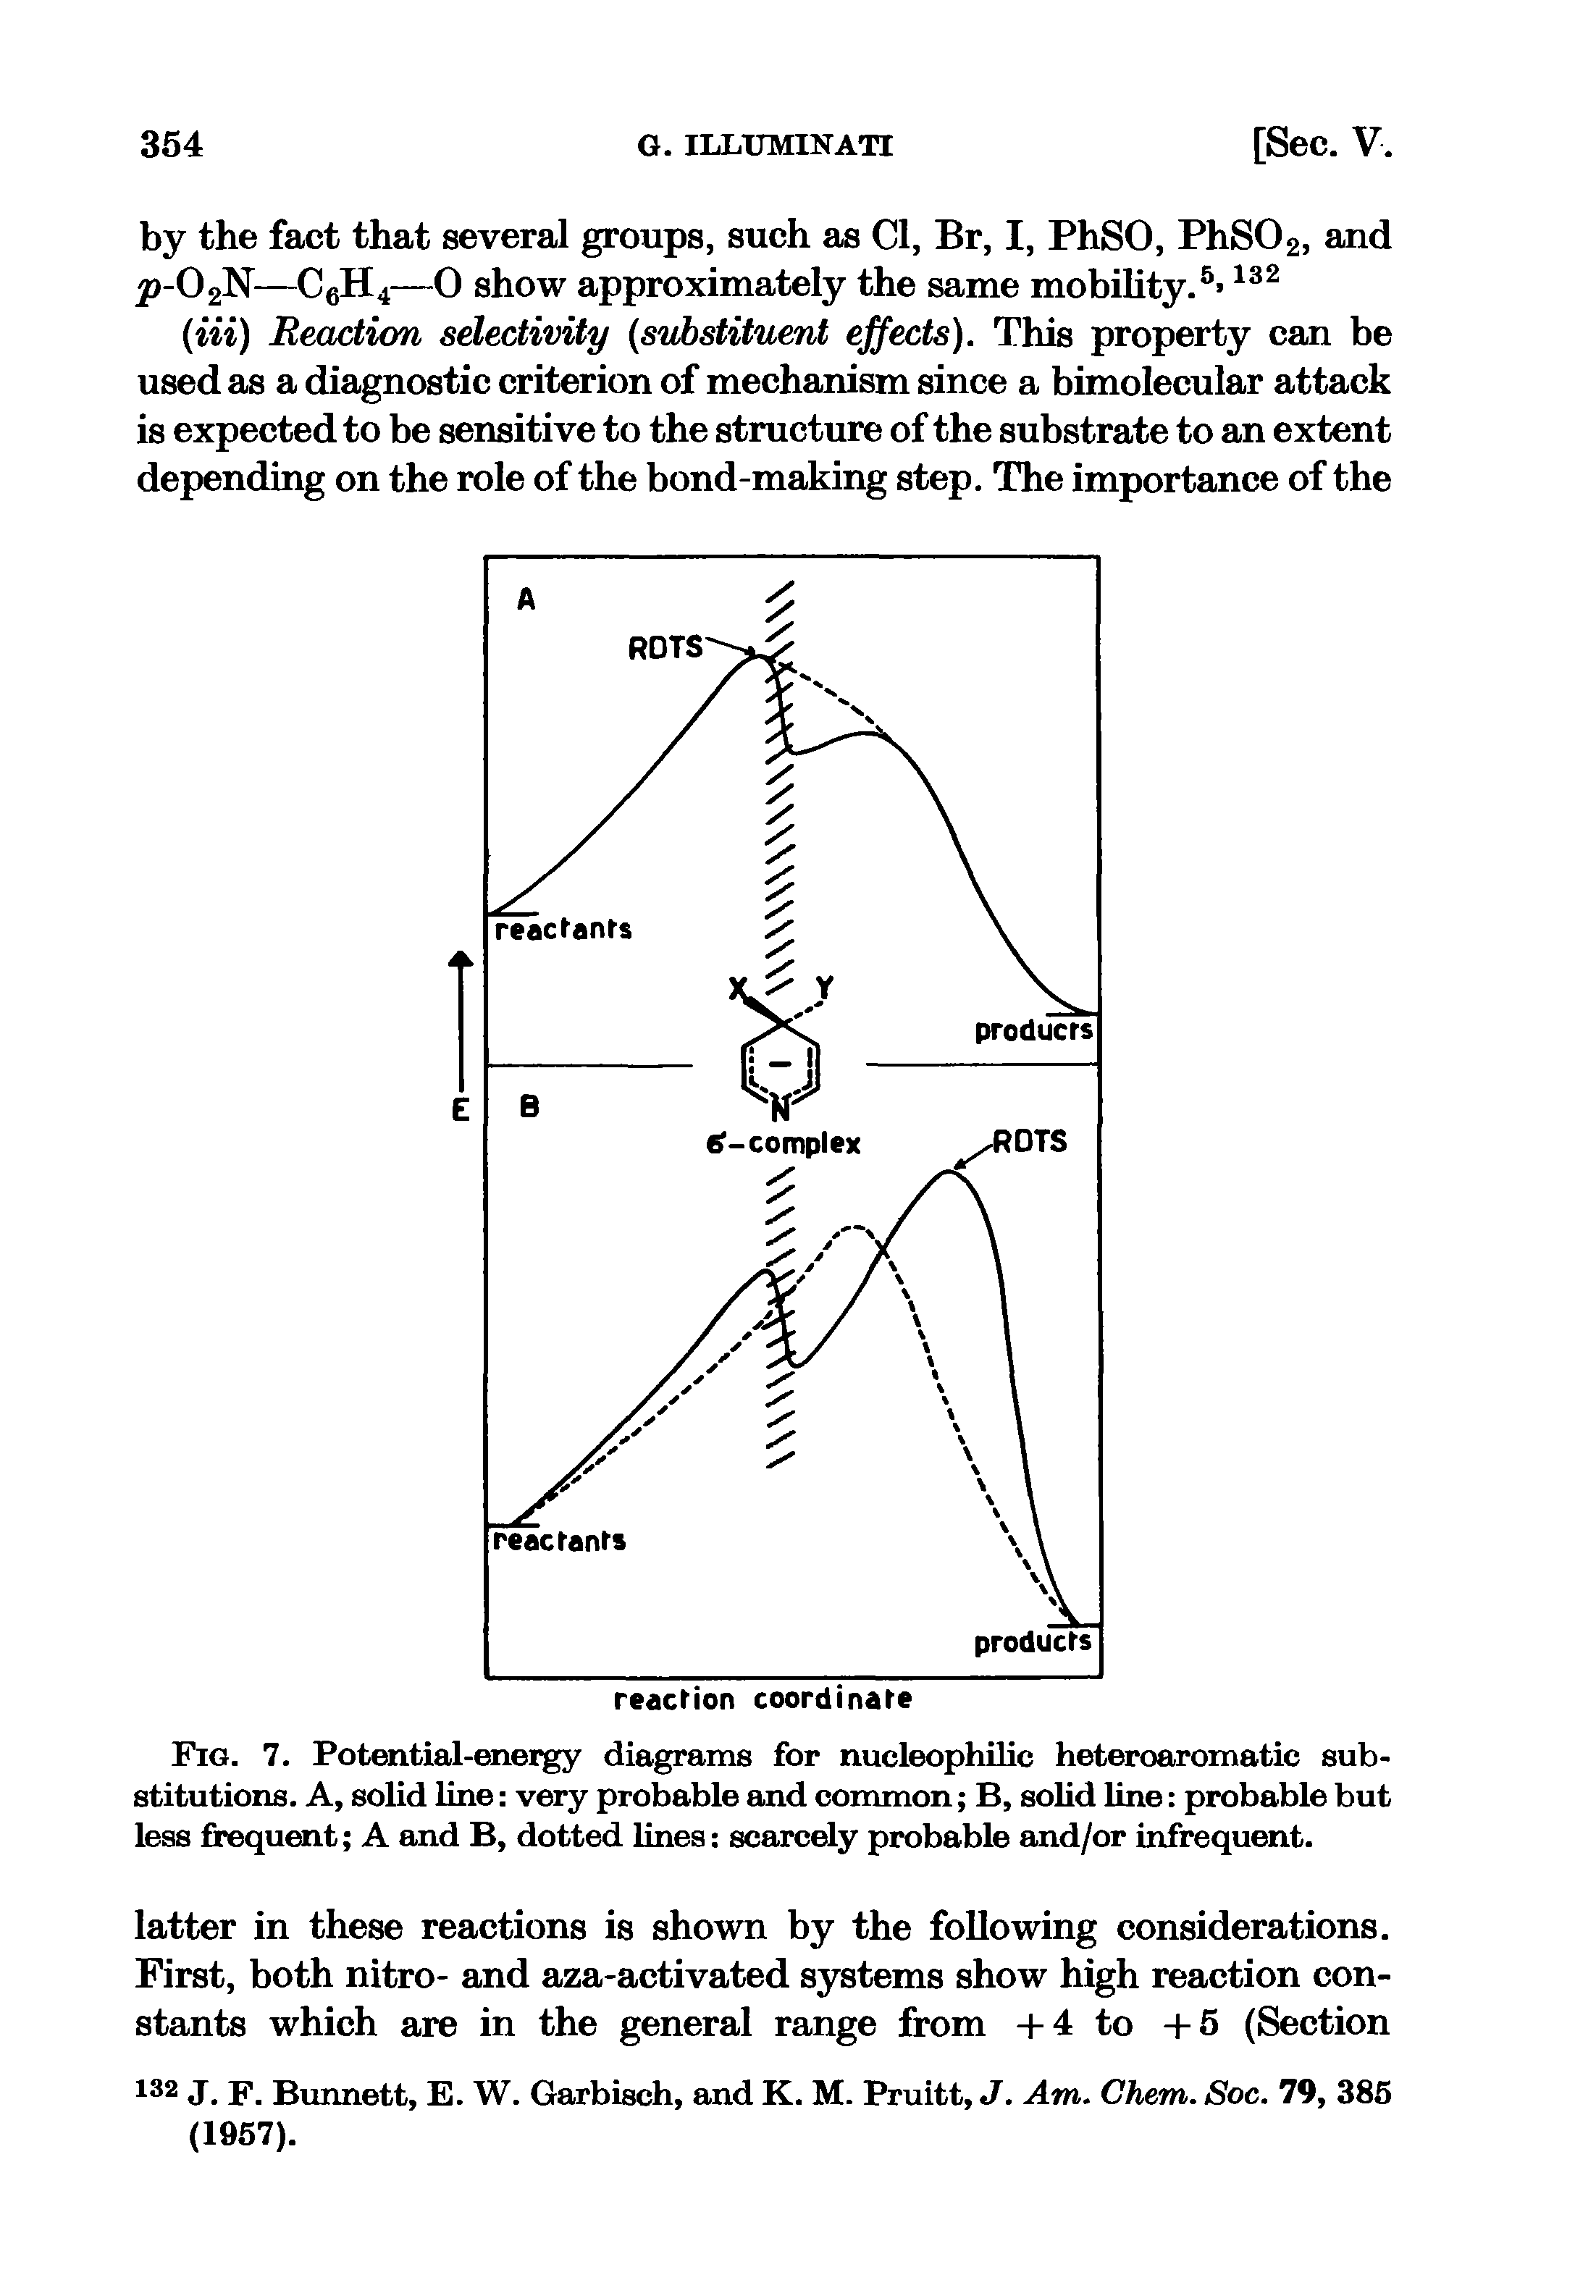 Fig. 7. Potential-energy diagrams for nucleophilic heteroaromatic substitutions. A, solid line very probable and common B, solid line probable but less frequent A and B, dotted lines scarcely probable and/or infrequent.